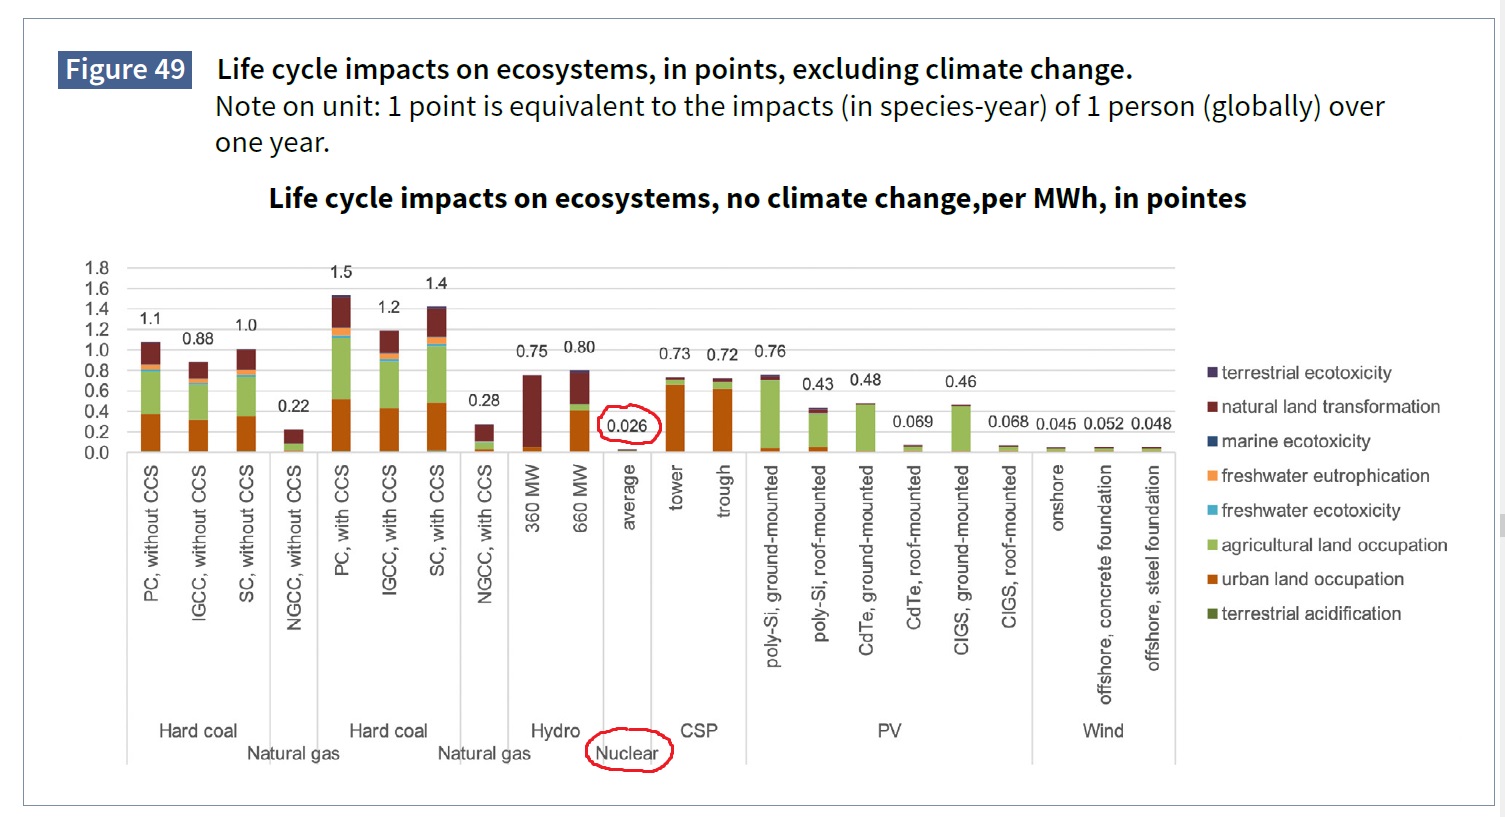 UNECE Fig 49 Life cycle impact on ecosystems, no climate change.jpg